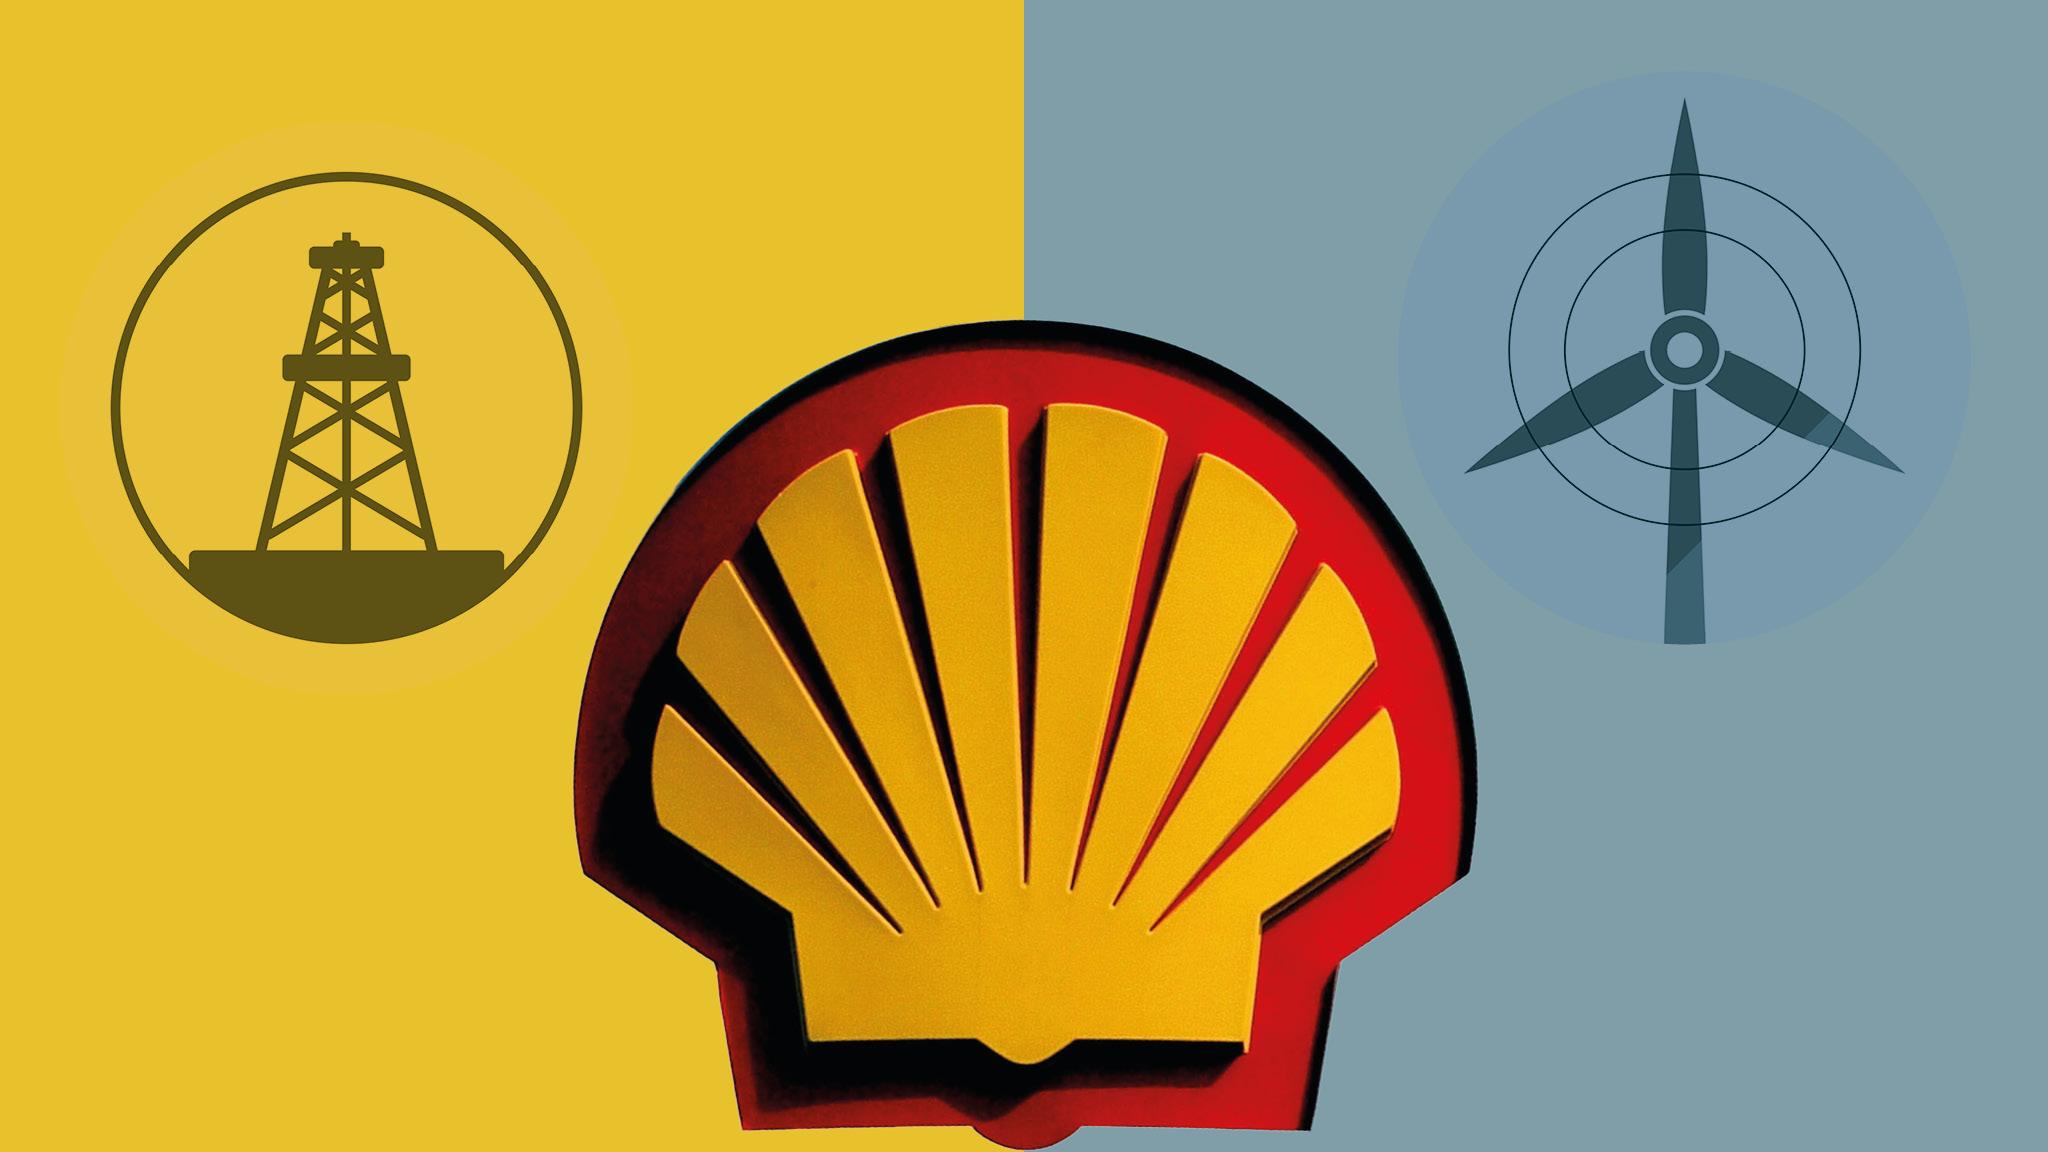 Royal Dutch Shell searches for a purpose beyond oil